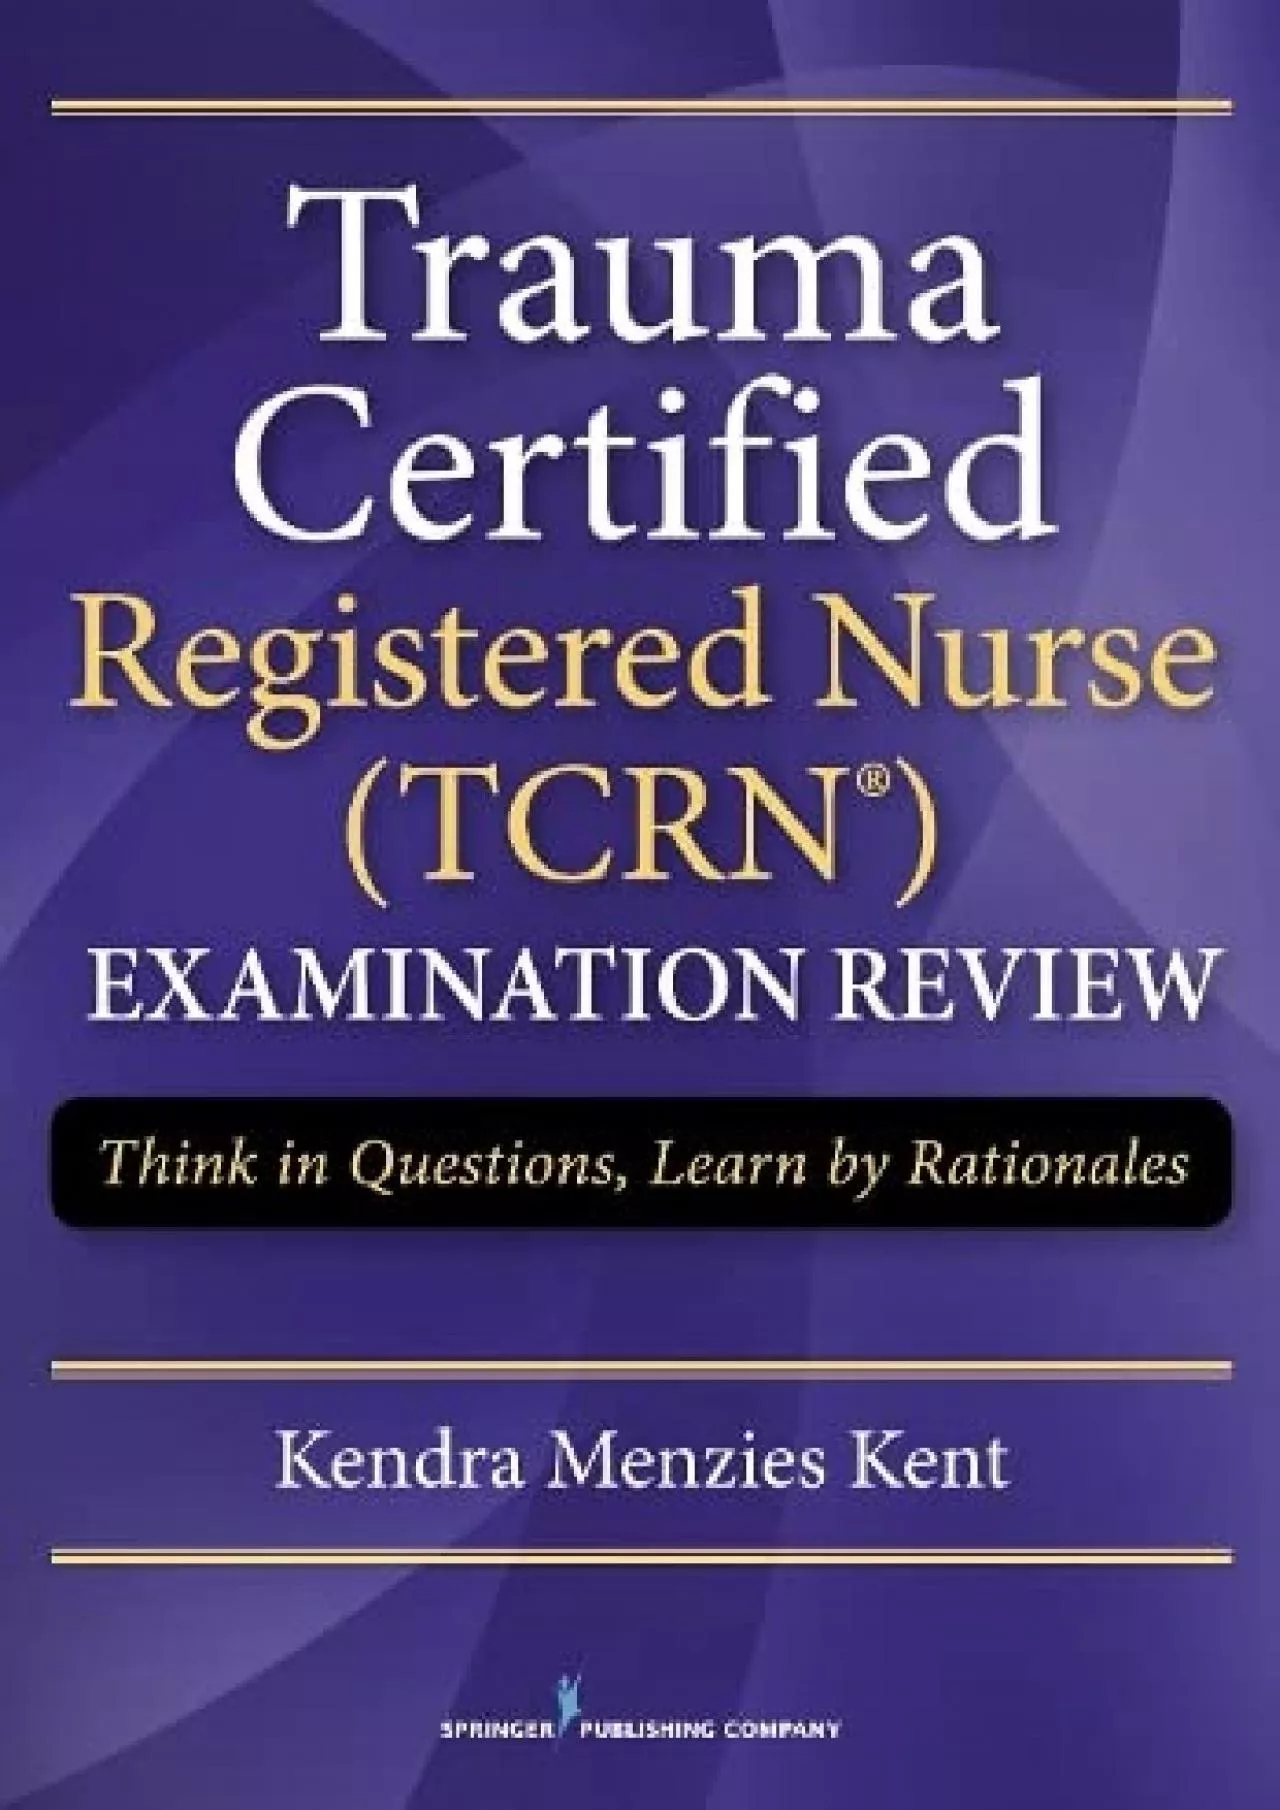 [DOWNLOAD] Trauma Certified Registered Nurse Exam Review: Think in Questions, Learn by